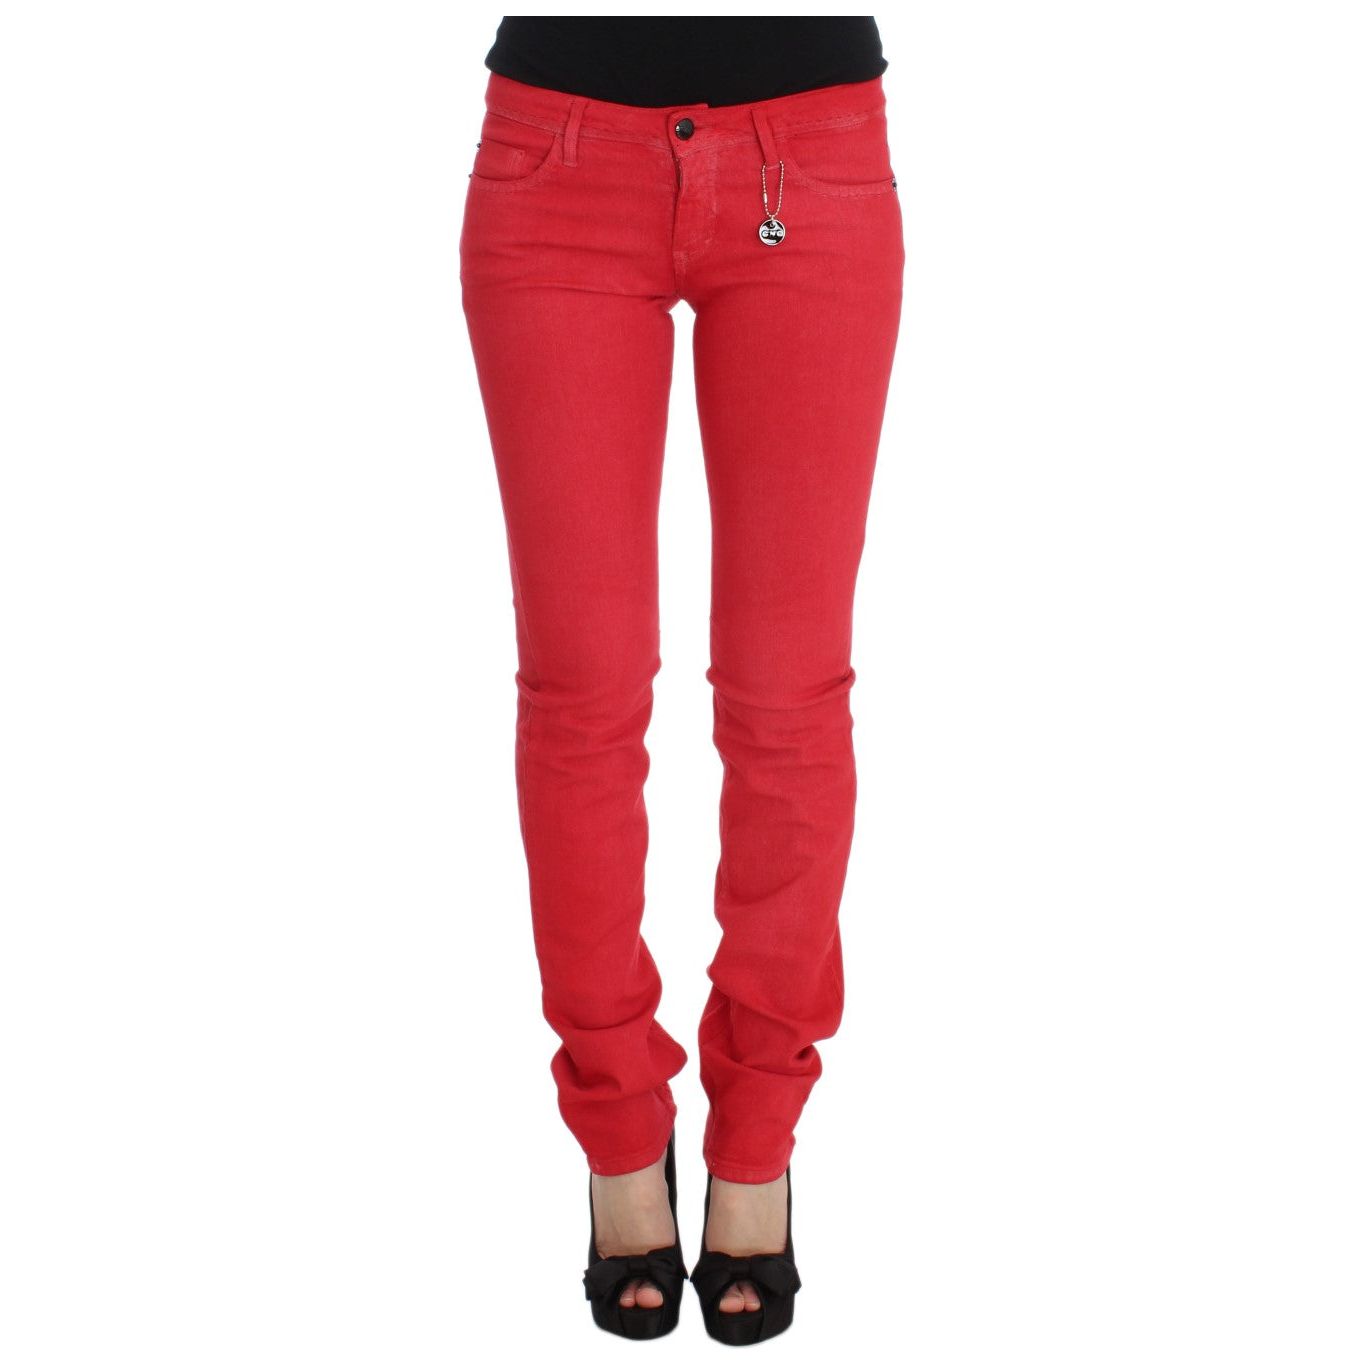 Chic Red Slim Fit Jeans